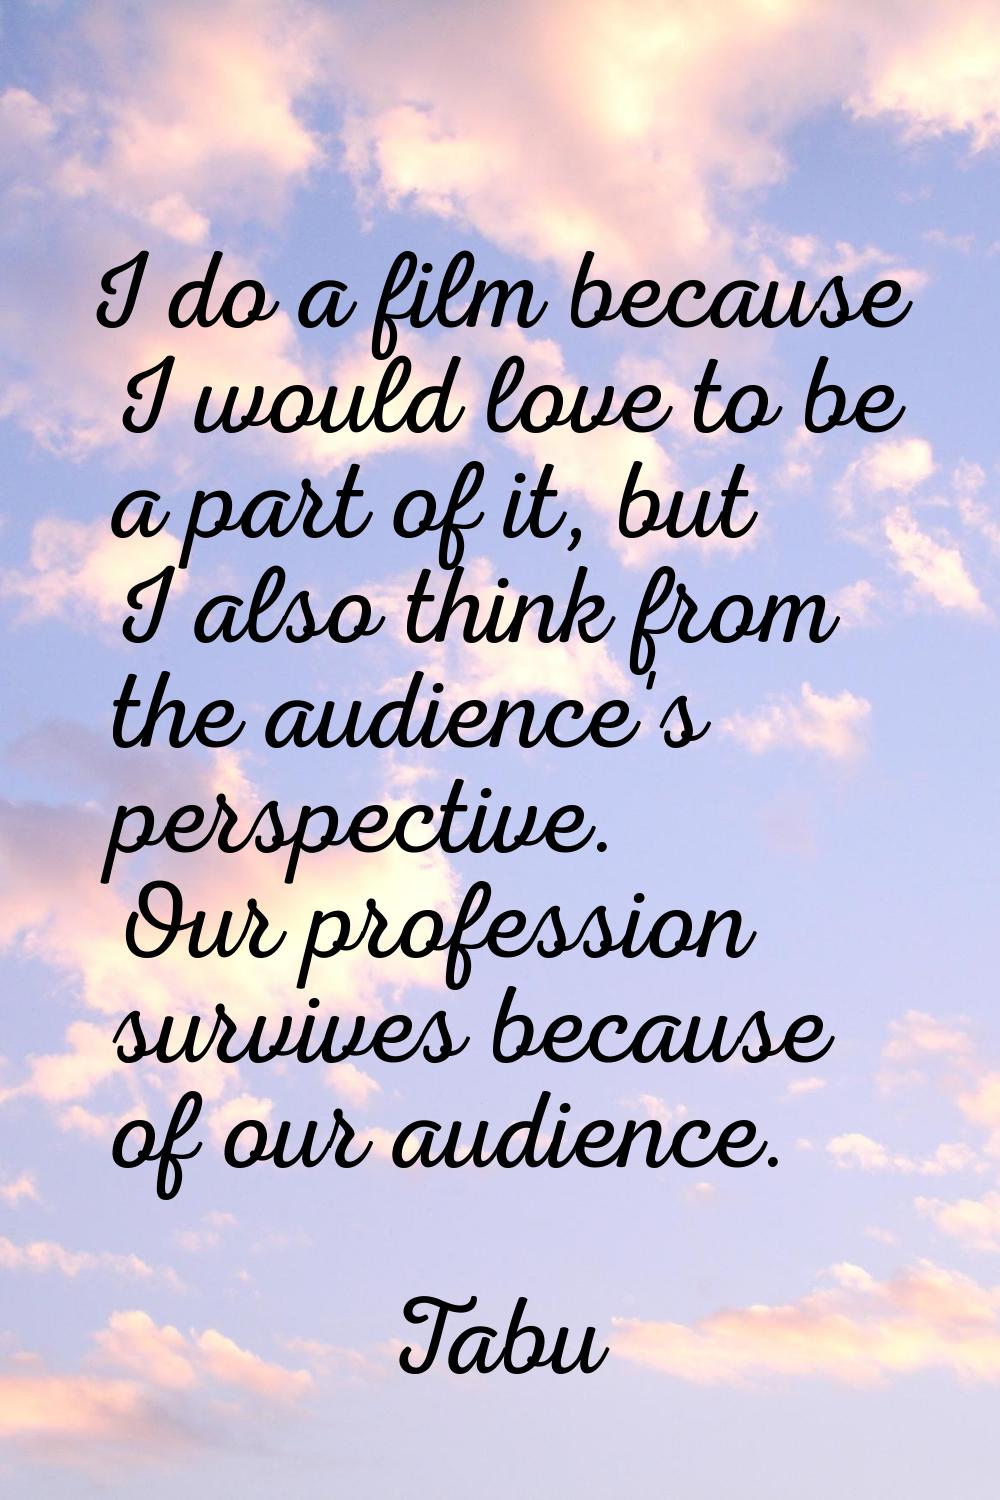 I do a film because I would love to be a part of it, but I also think from the audience's perspecti